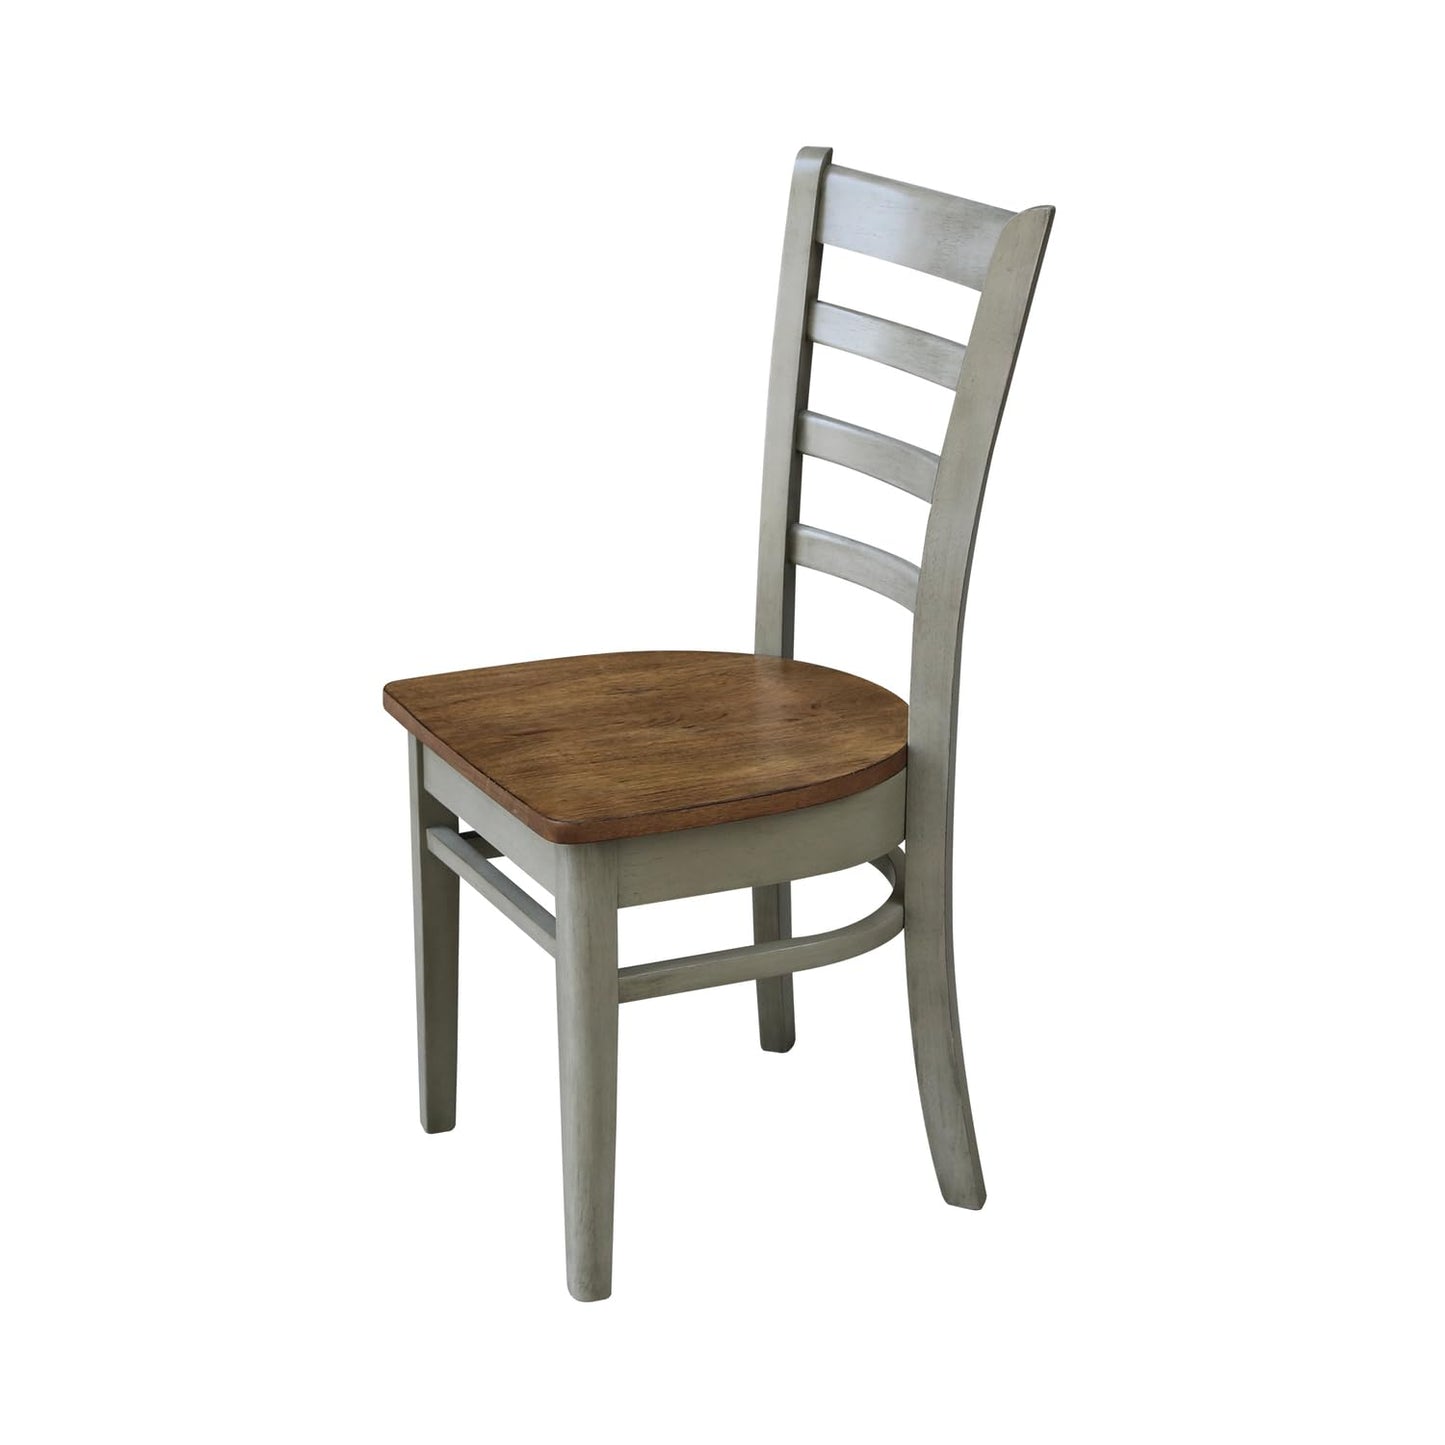 IC International Concepts International Concepts Emily Side, Set of 2 Chair, Distressed Hickory/Stone